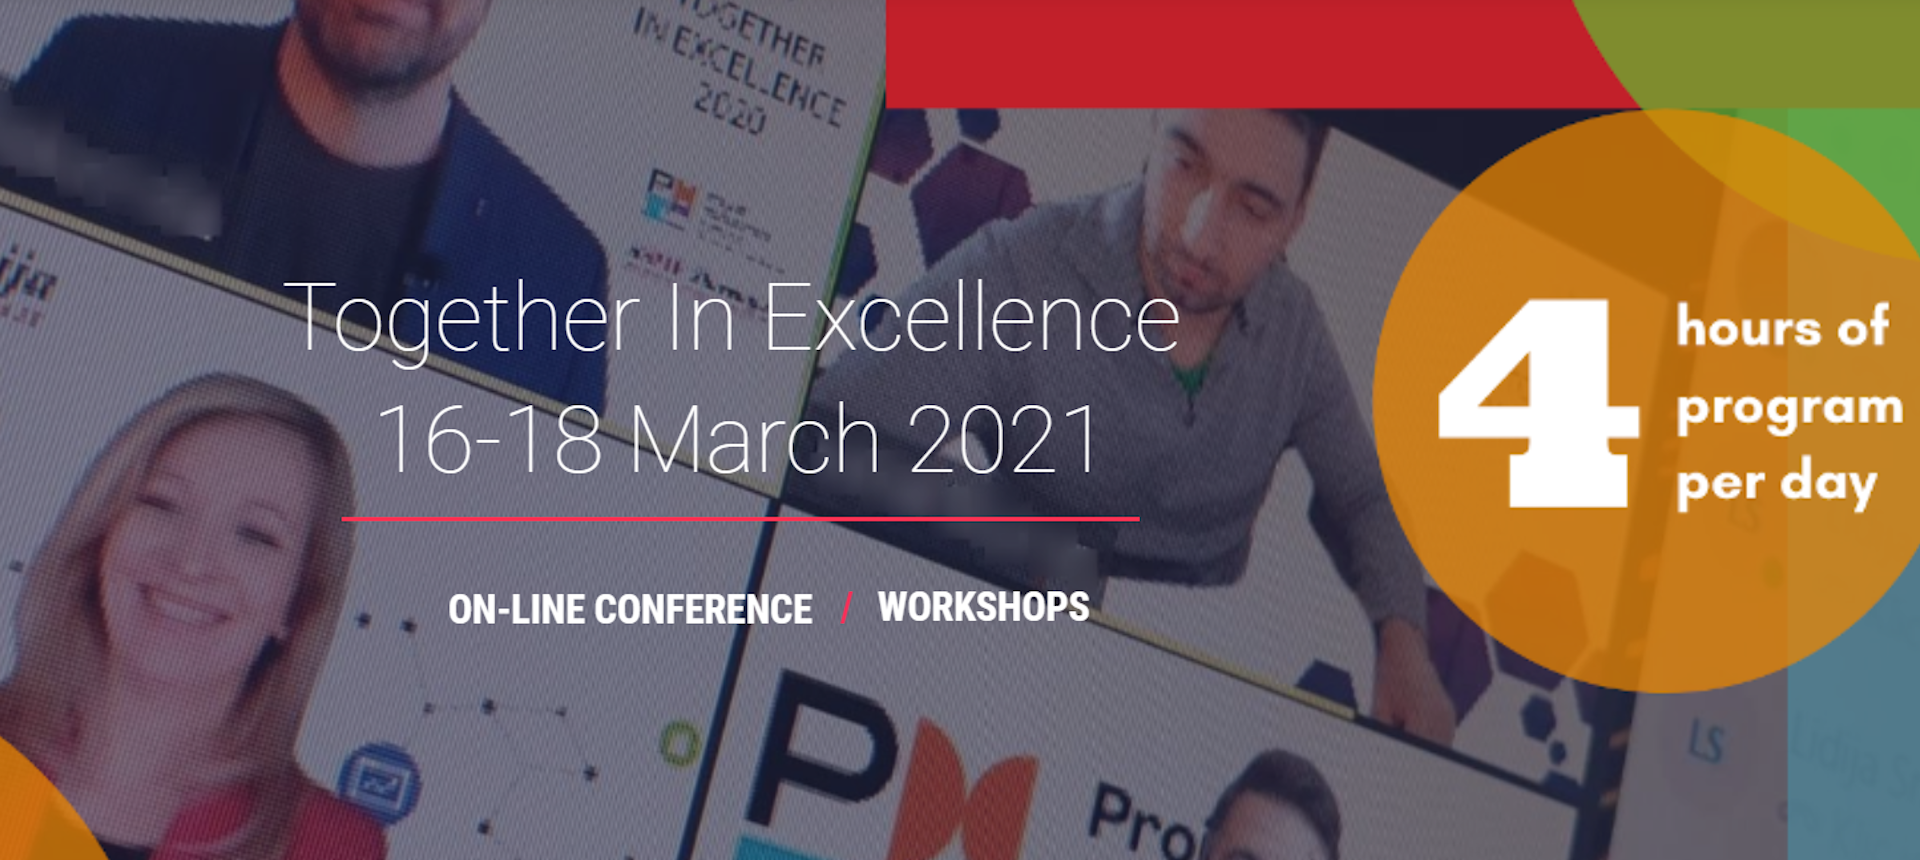 Together in Excellence March 2021